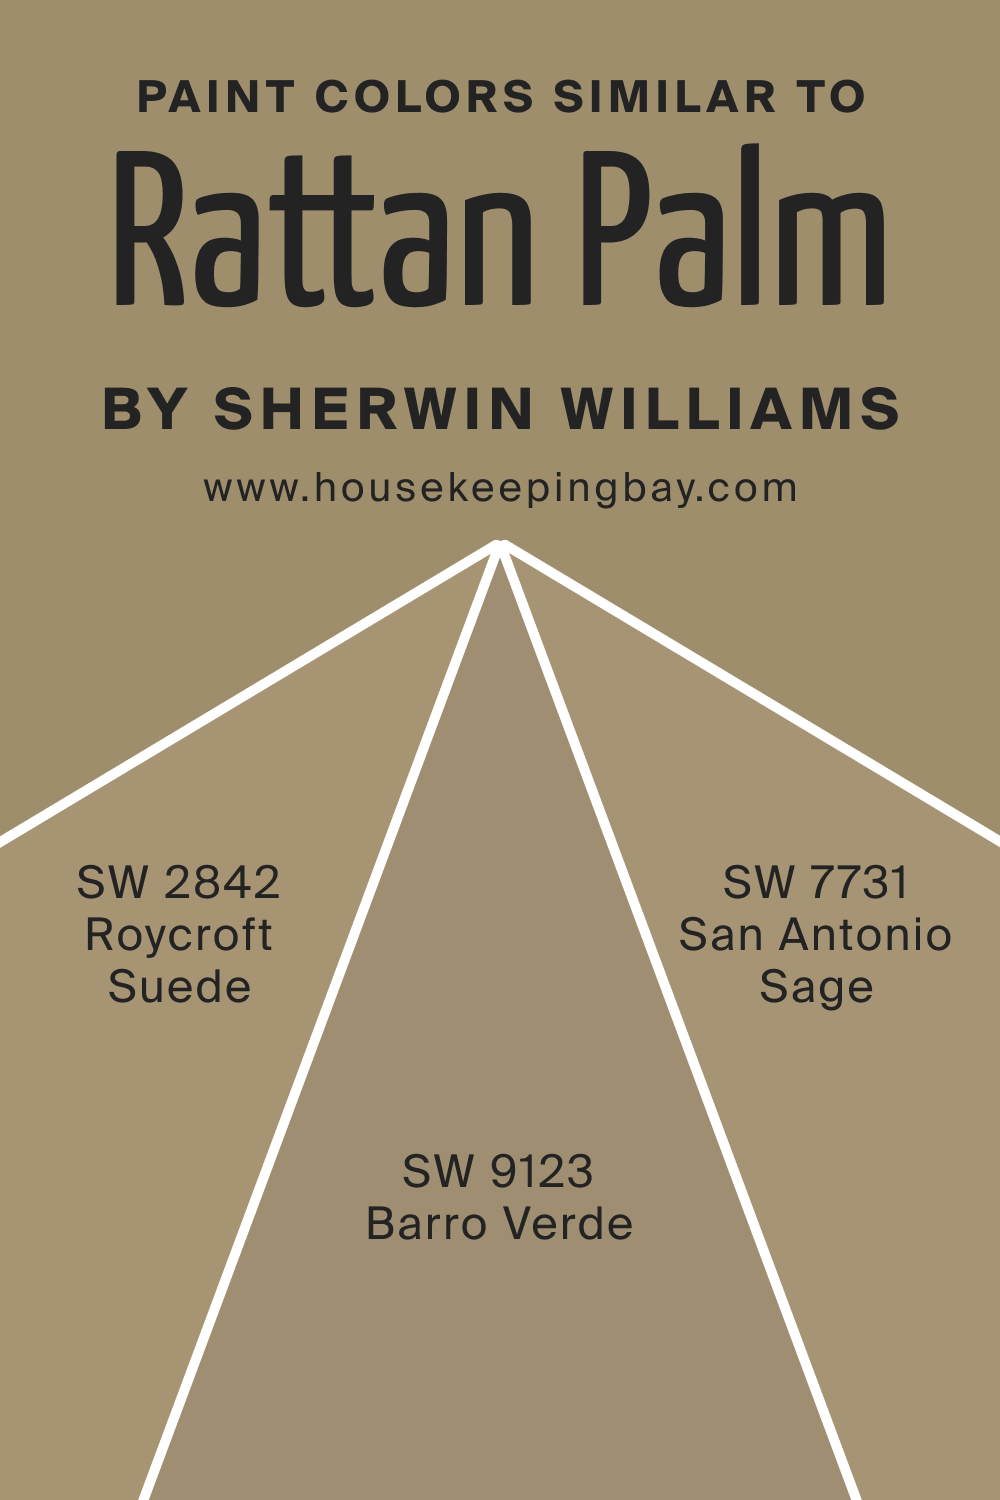 Paint Color Similar to SW 9533 Rattan Palm by Sherwin Williams